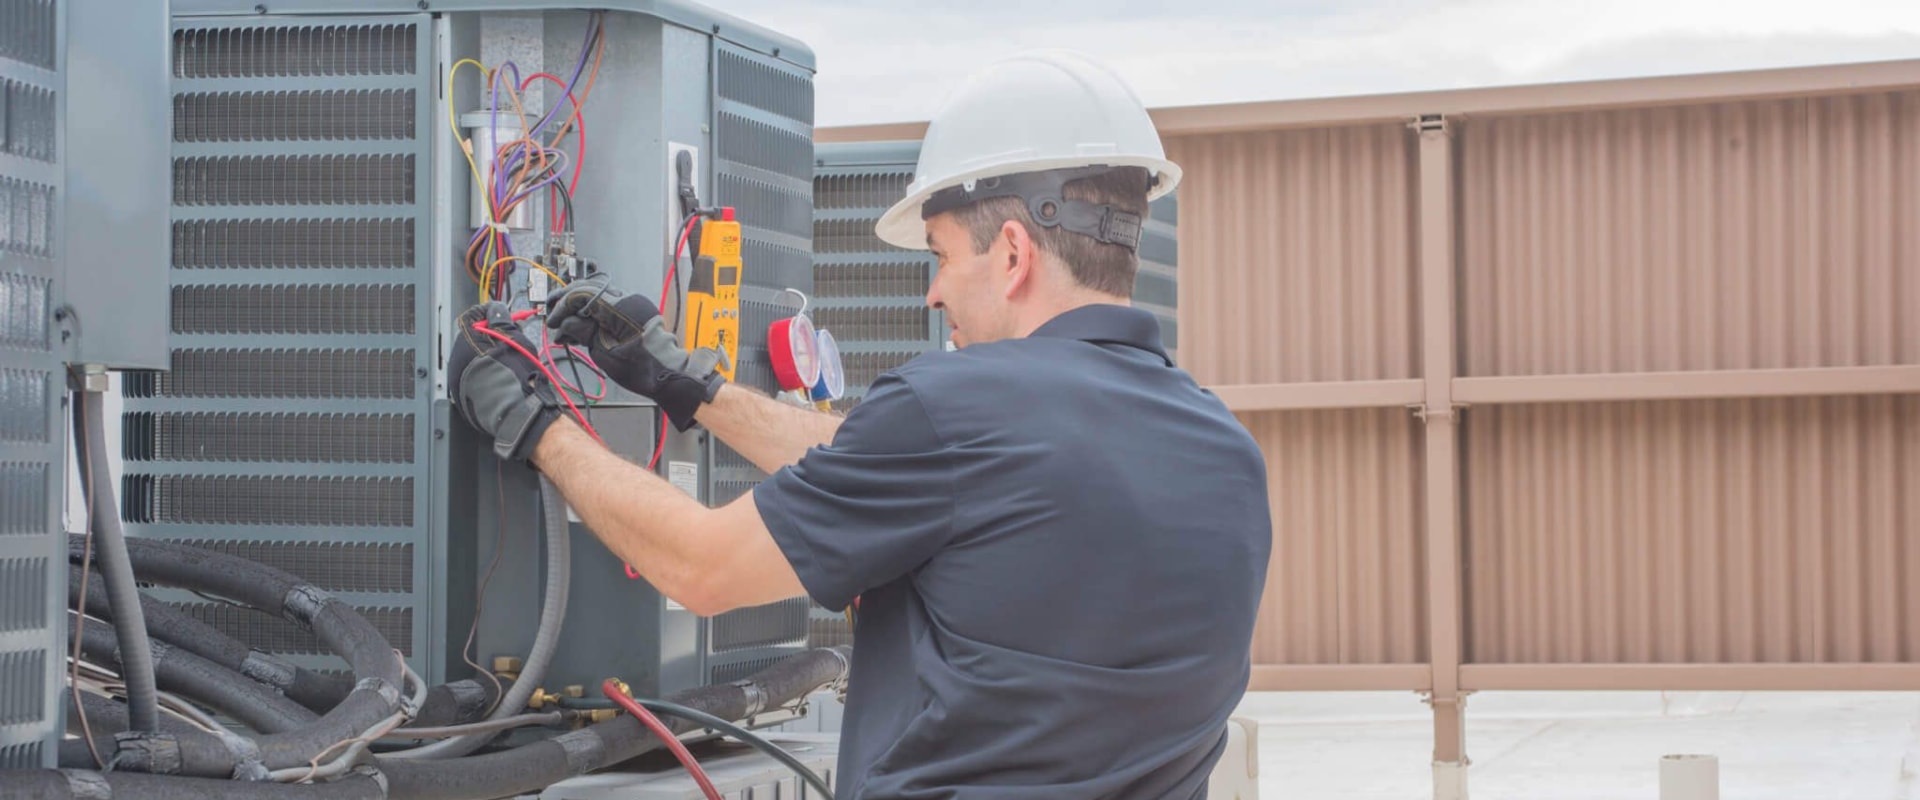 How Often Should You Have Maintenance on Your Air Conditioner? - A Guide for Homeowners